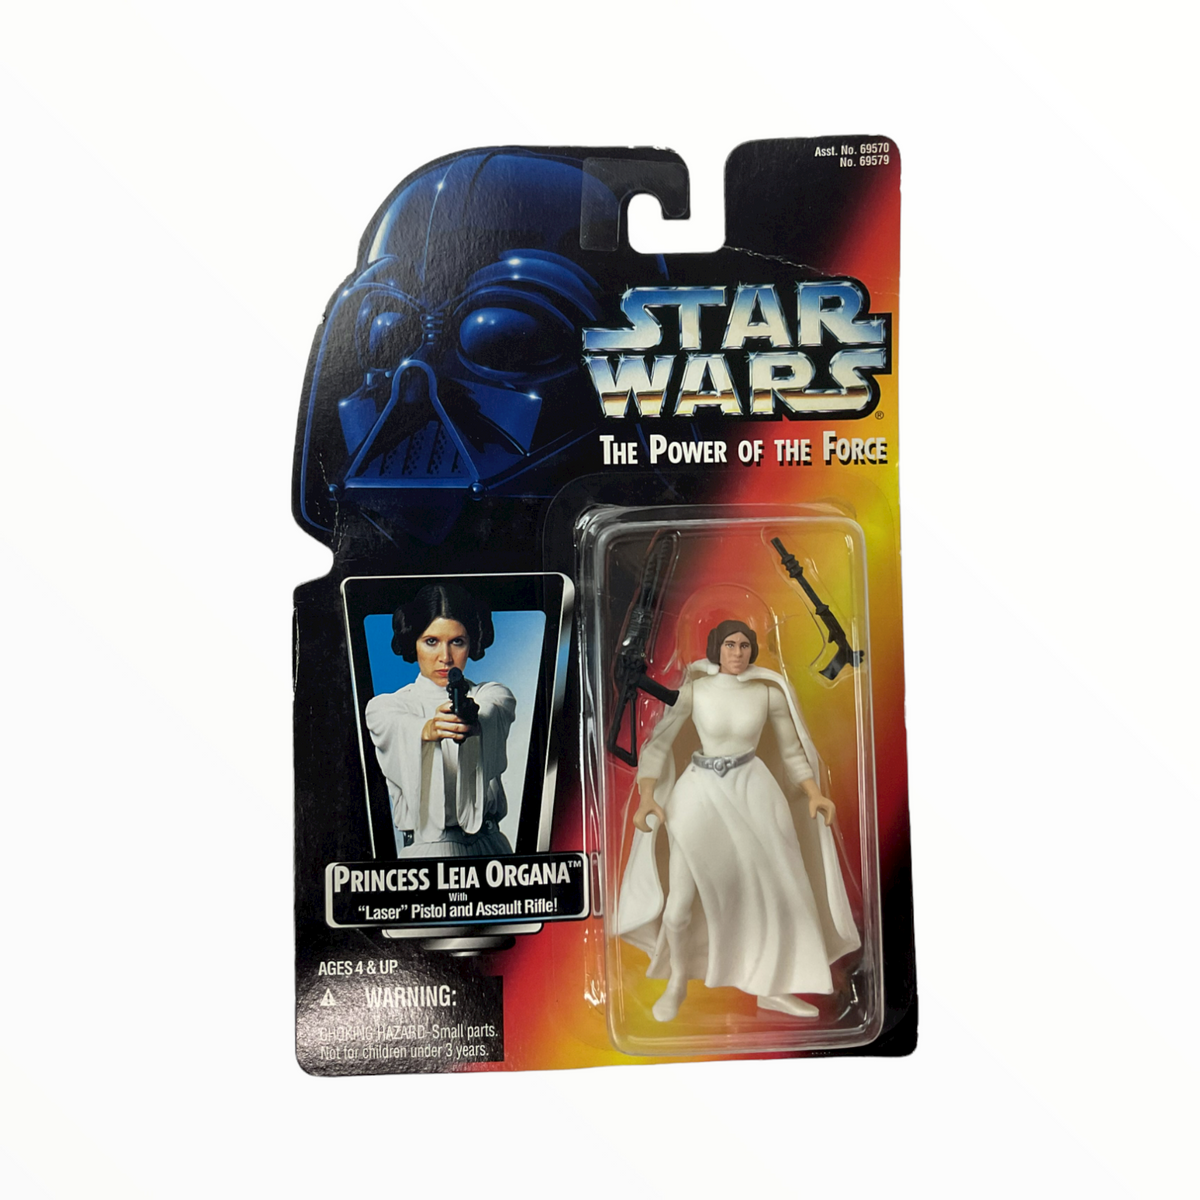 Star Wars Power of the Force Princess Leia Organa Green Card Action Figure